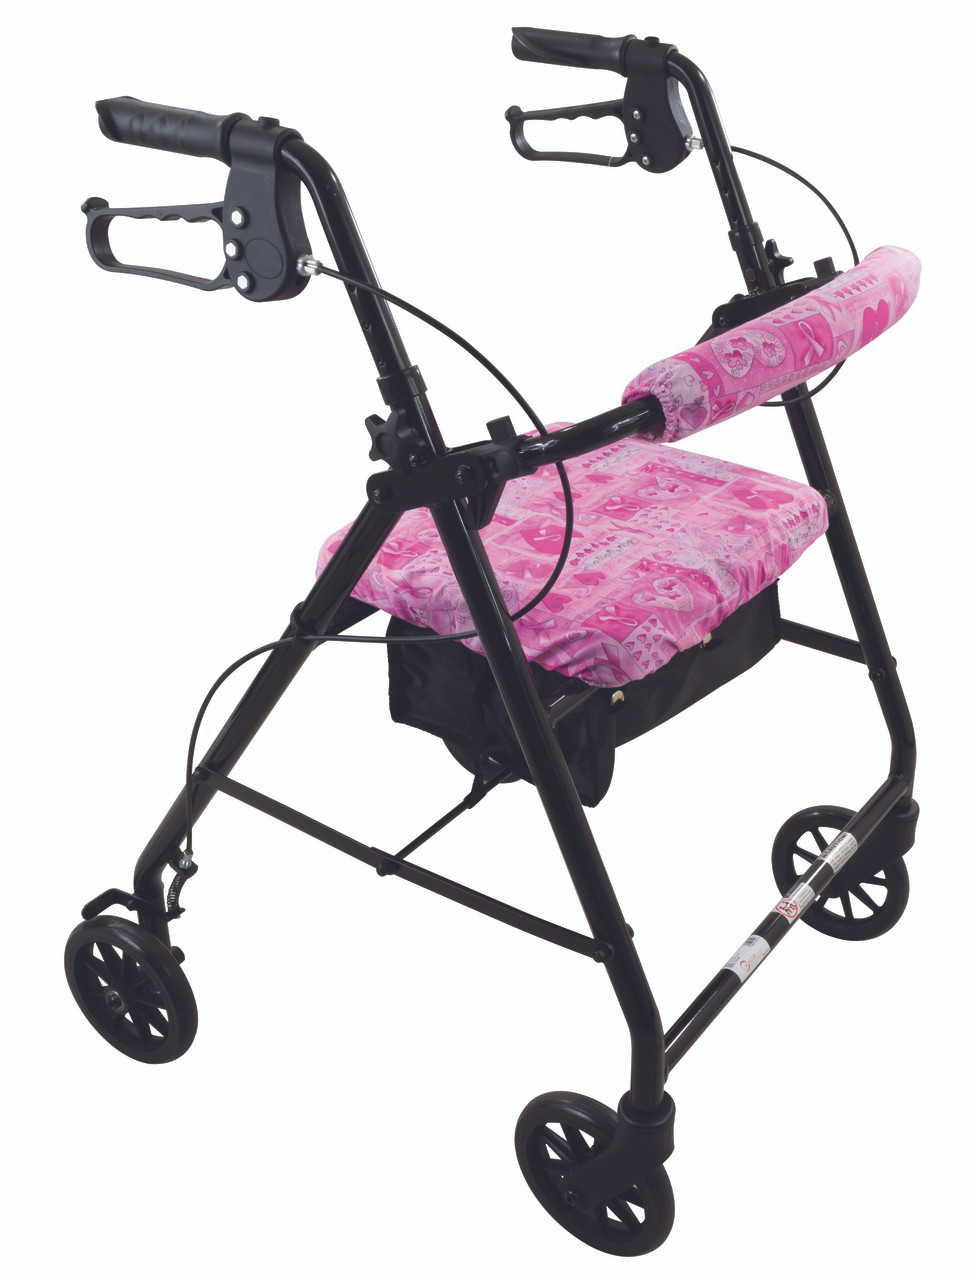 Rollator shown with Breast Cancer Awareness Seat and Backrest Covers